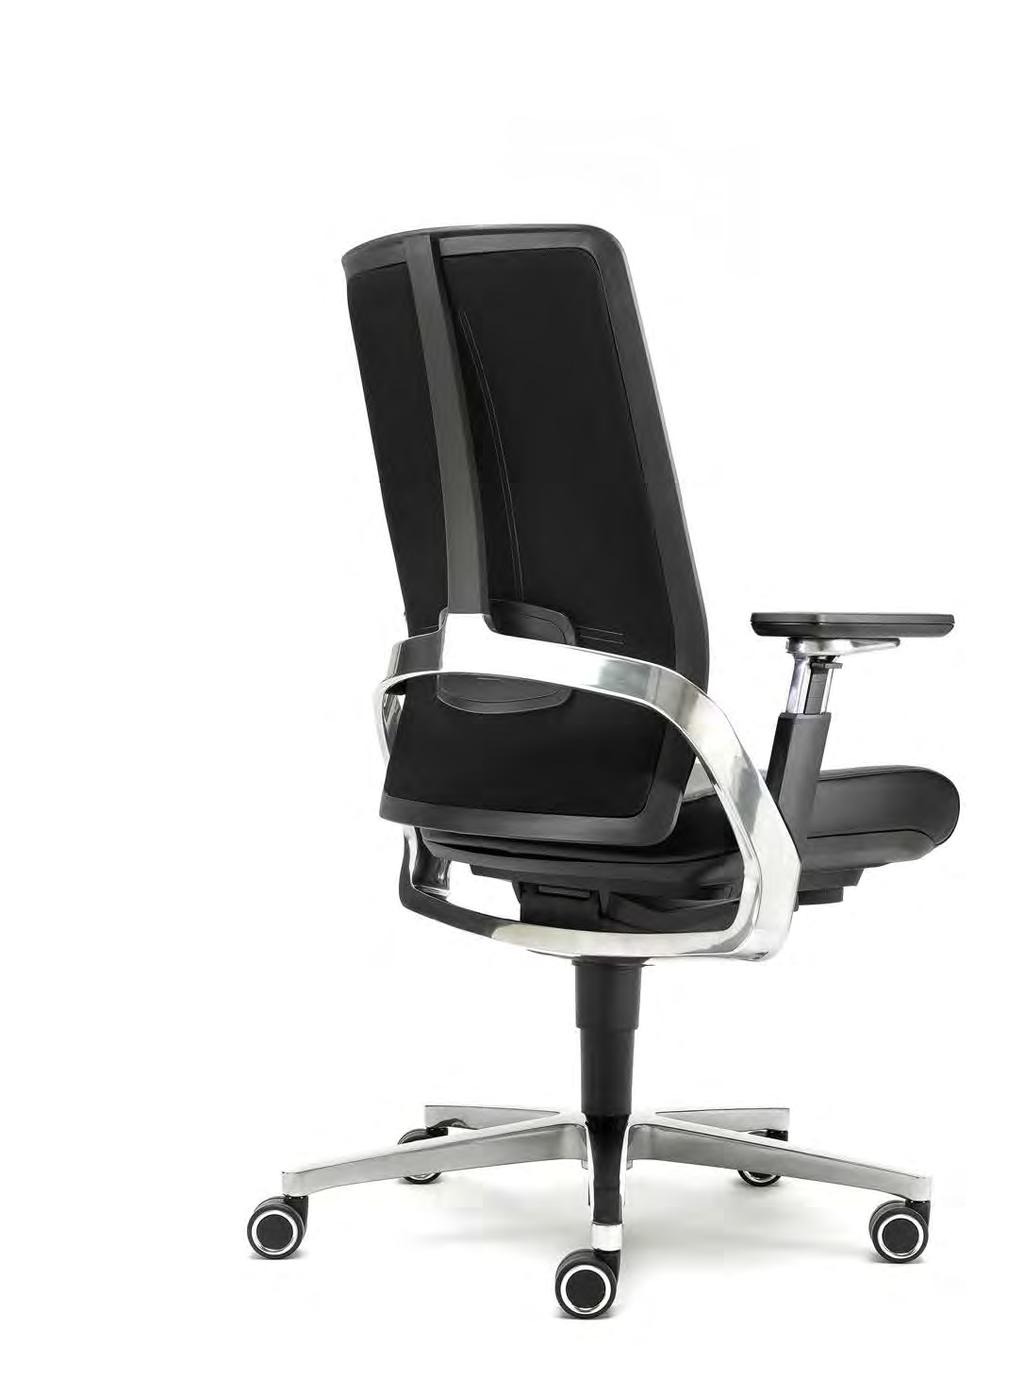 10 MOVEMENT FOR MODERN WORK-LIFE i-workchair SEATING 11 THESENATORGROUP.